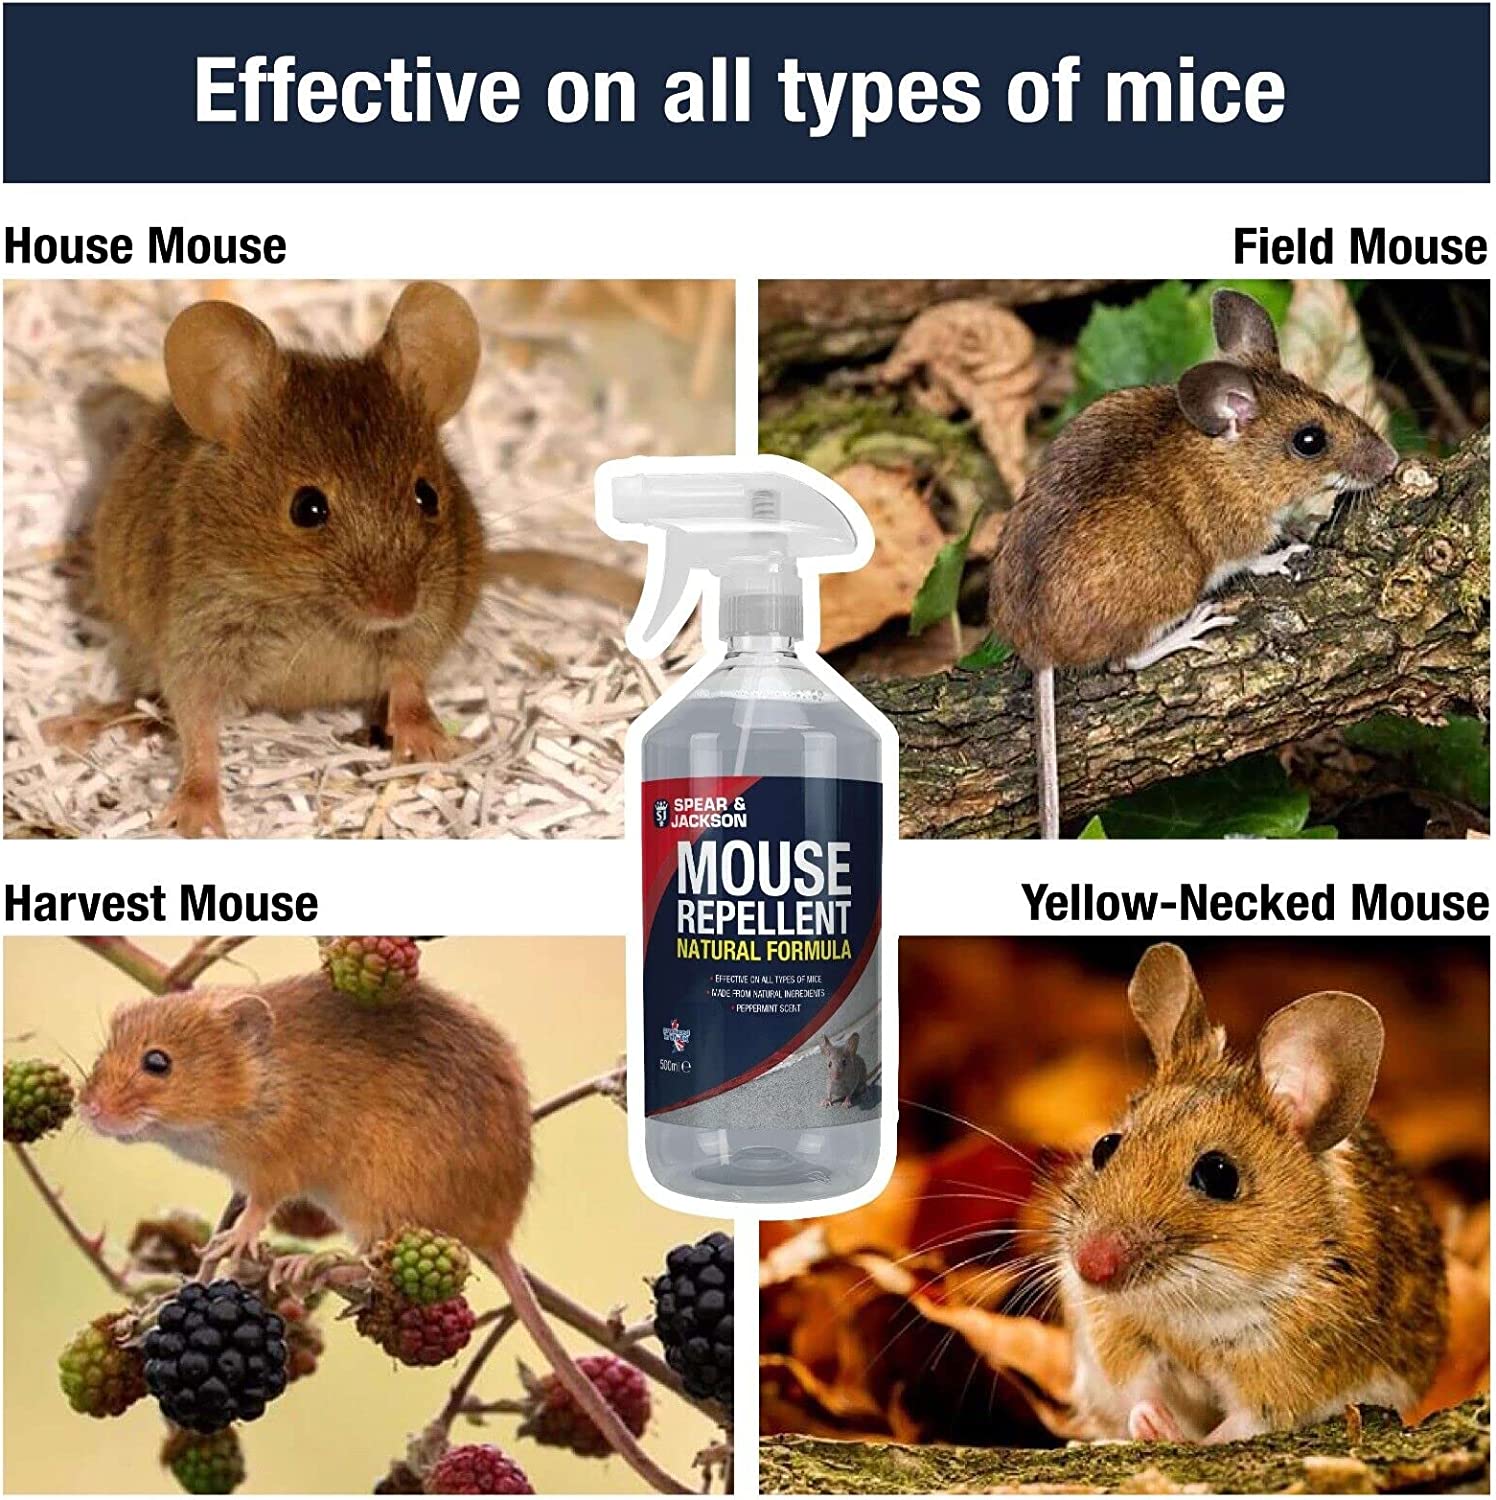 Mouse Repellent 500ml Peppermint Scent Spear and Jackson